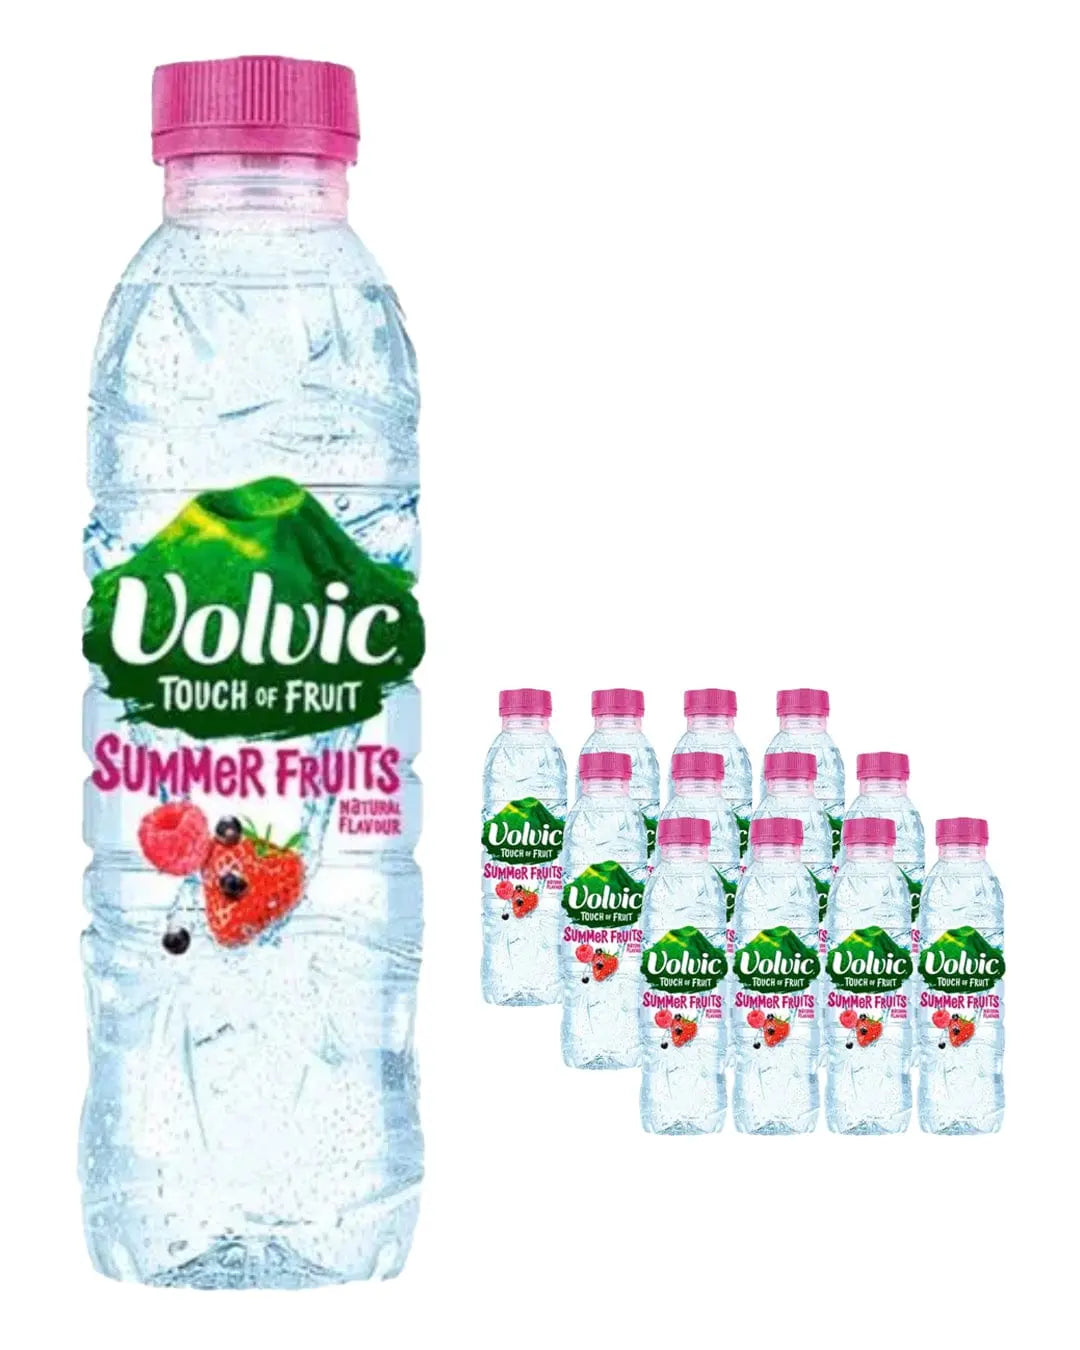 Volvic Touch of Fruit Summer Fruit Flavoured Water Multipack, 12 x 500 ml Water